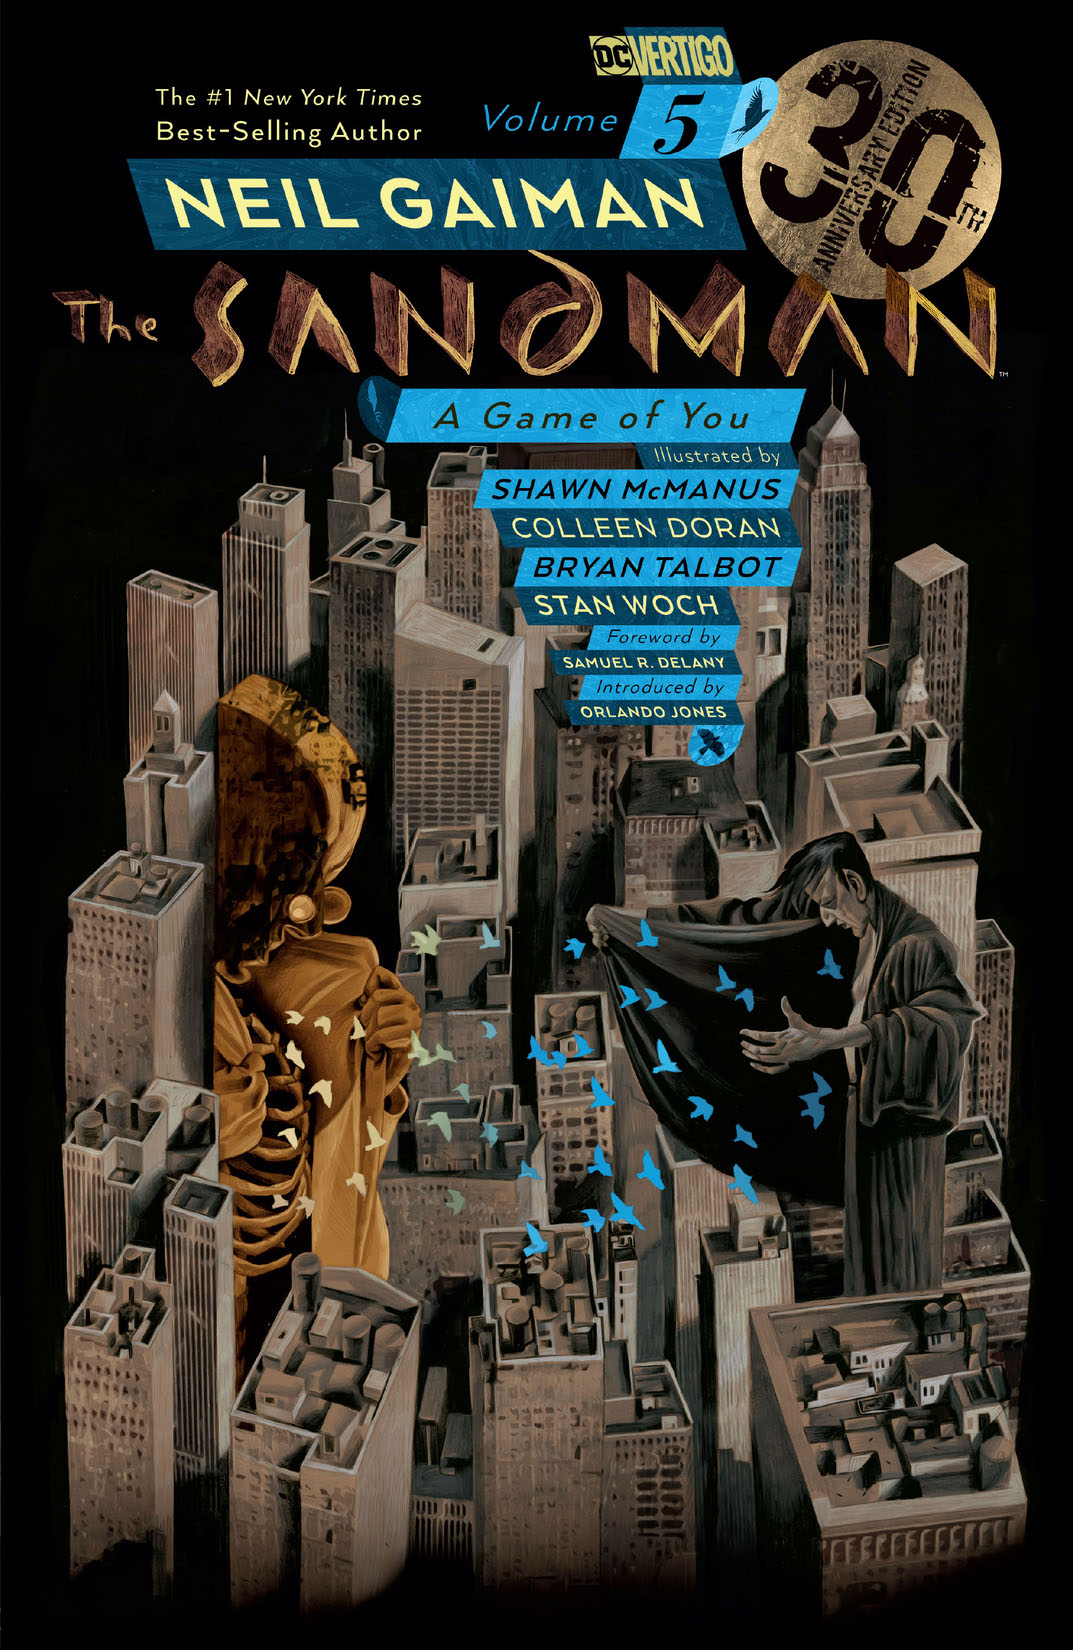 Sandman Vol. 5: A Game of You 30th Anniversary New Edition preview images